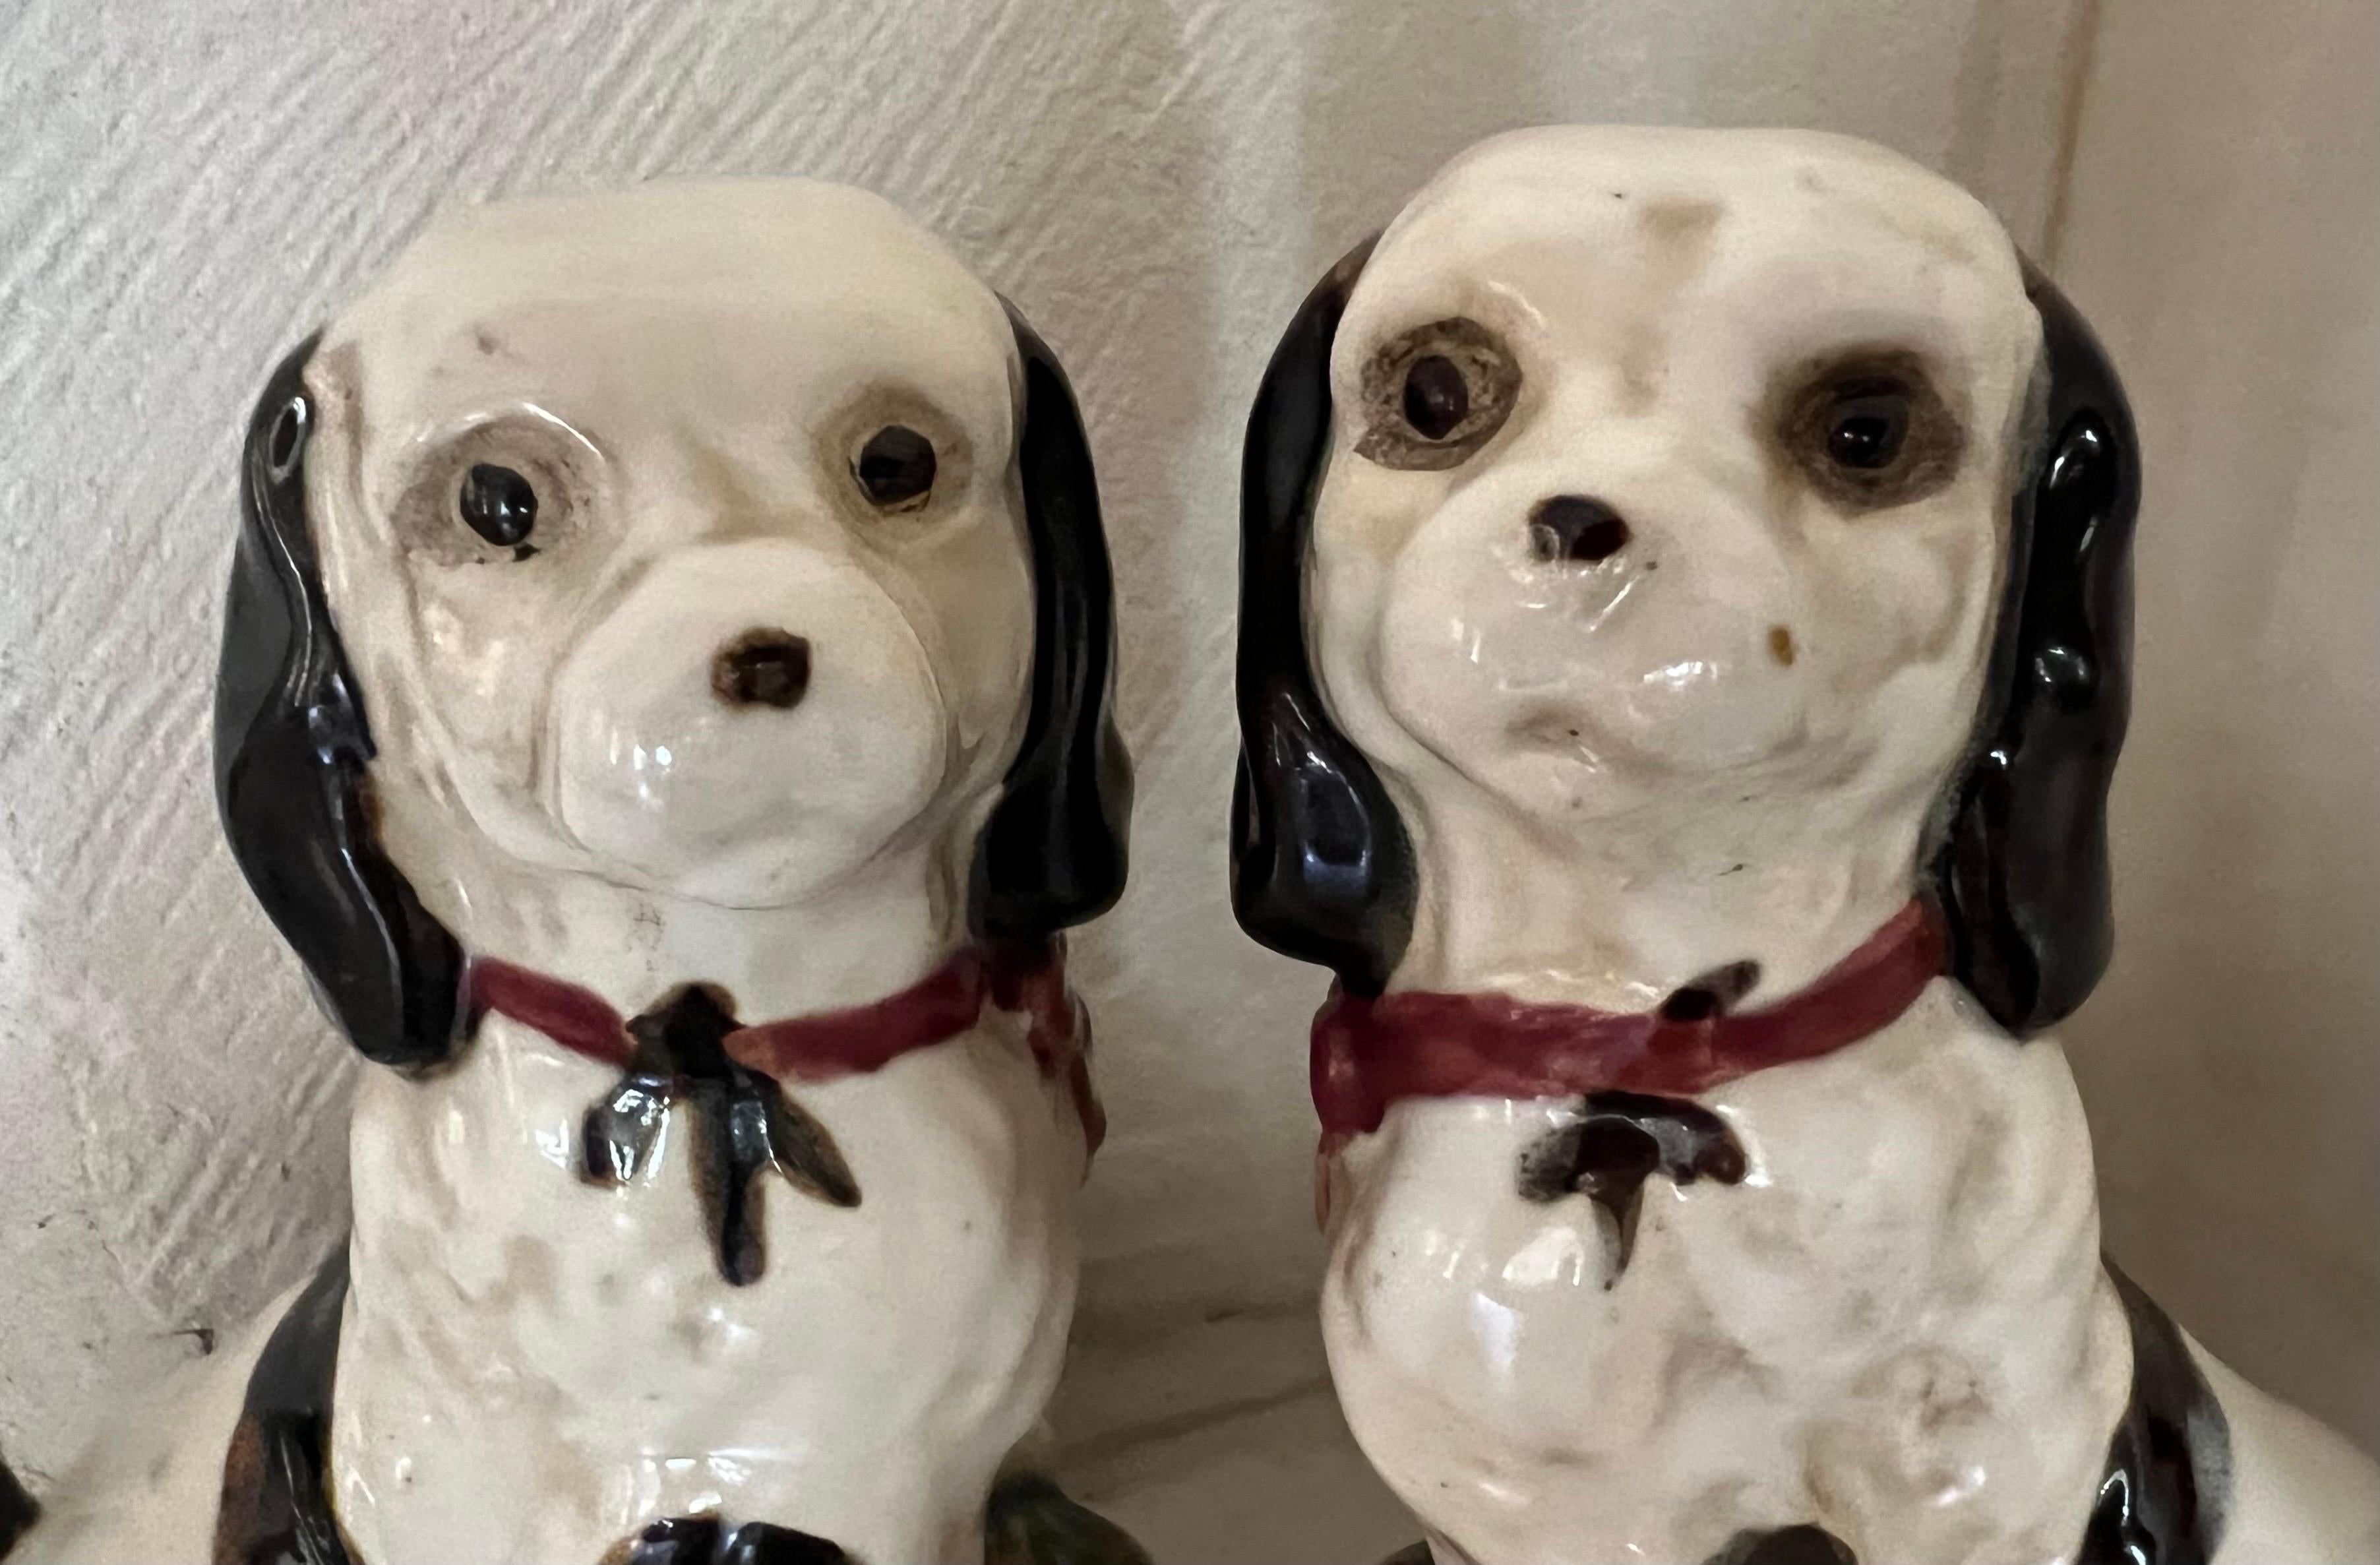 staffordshire dog bookends